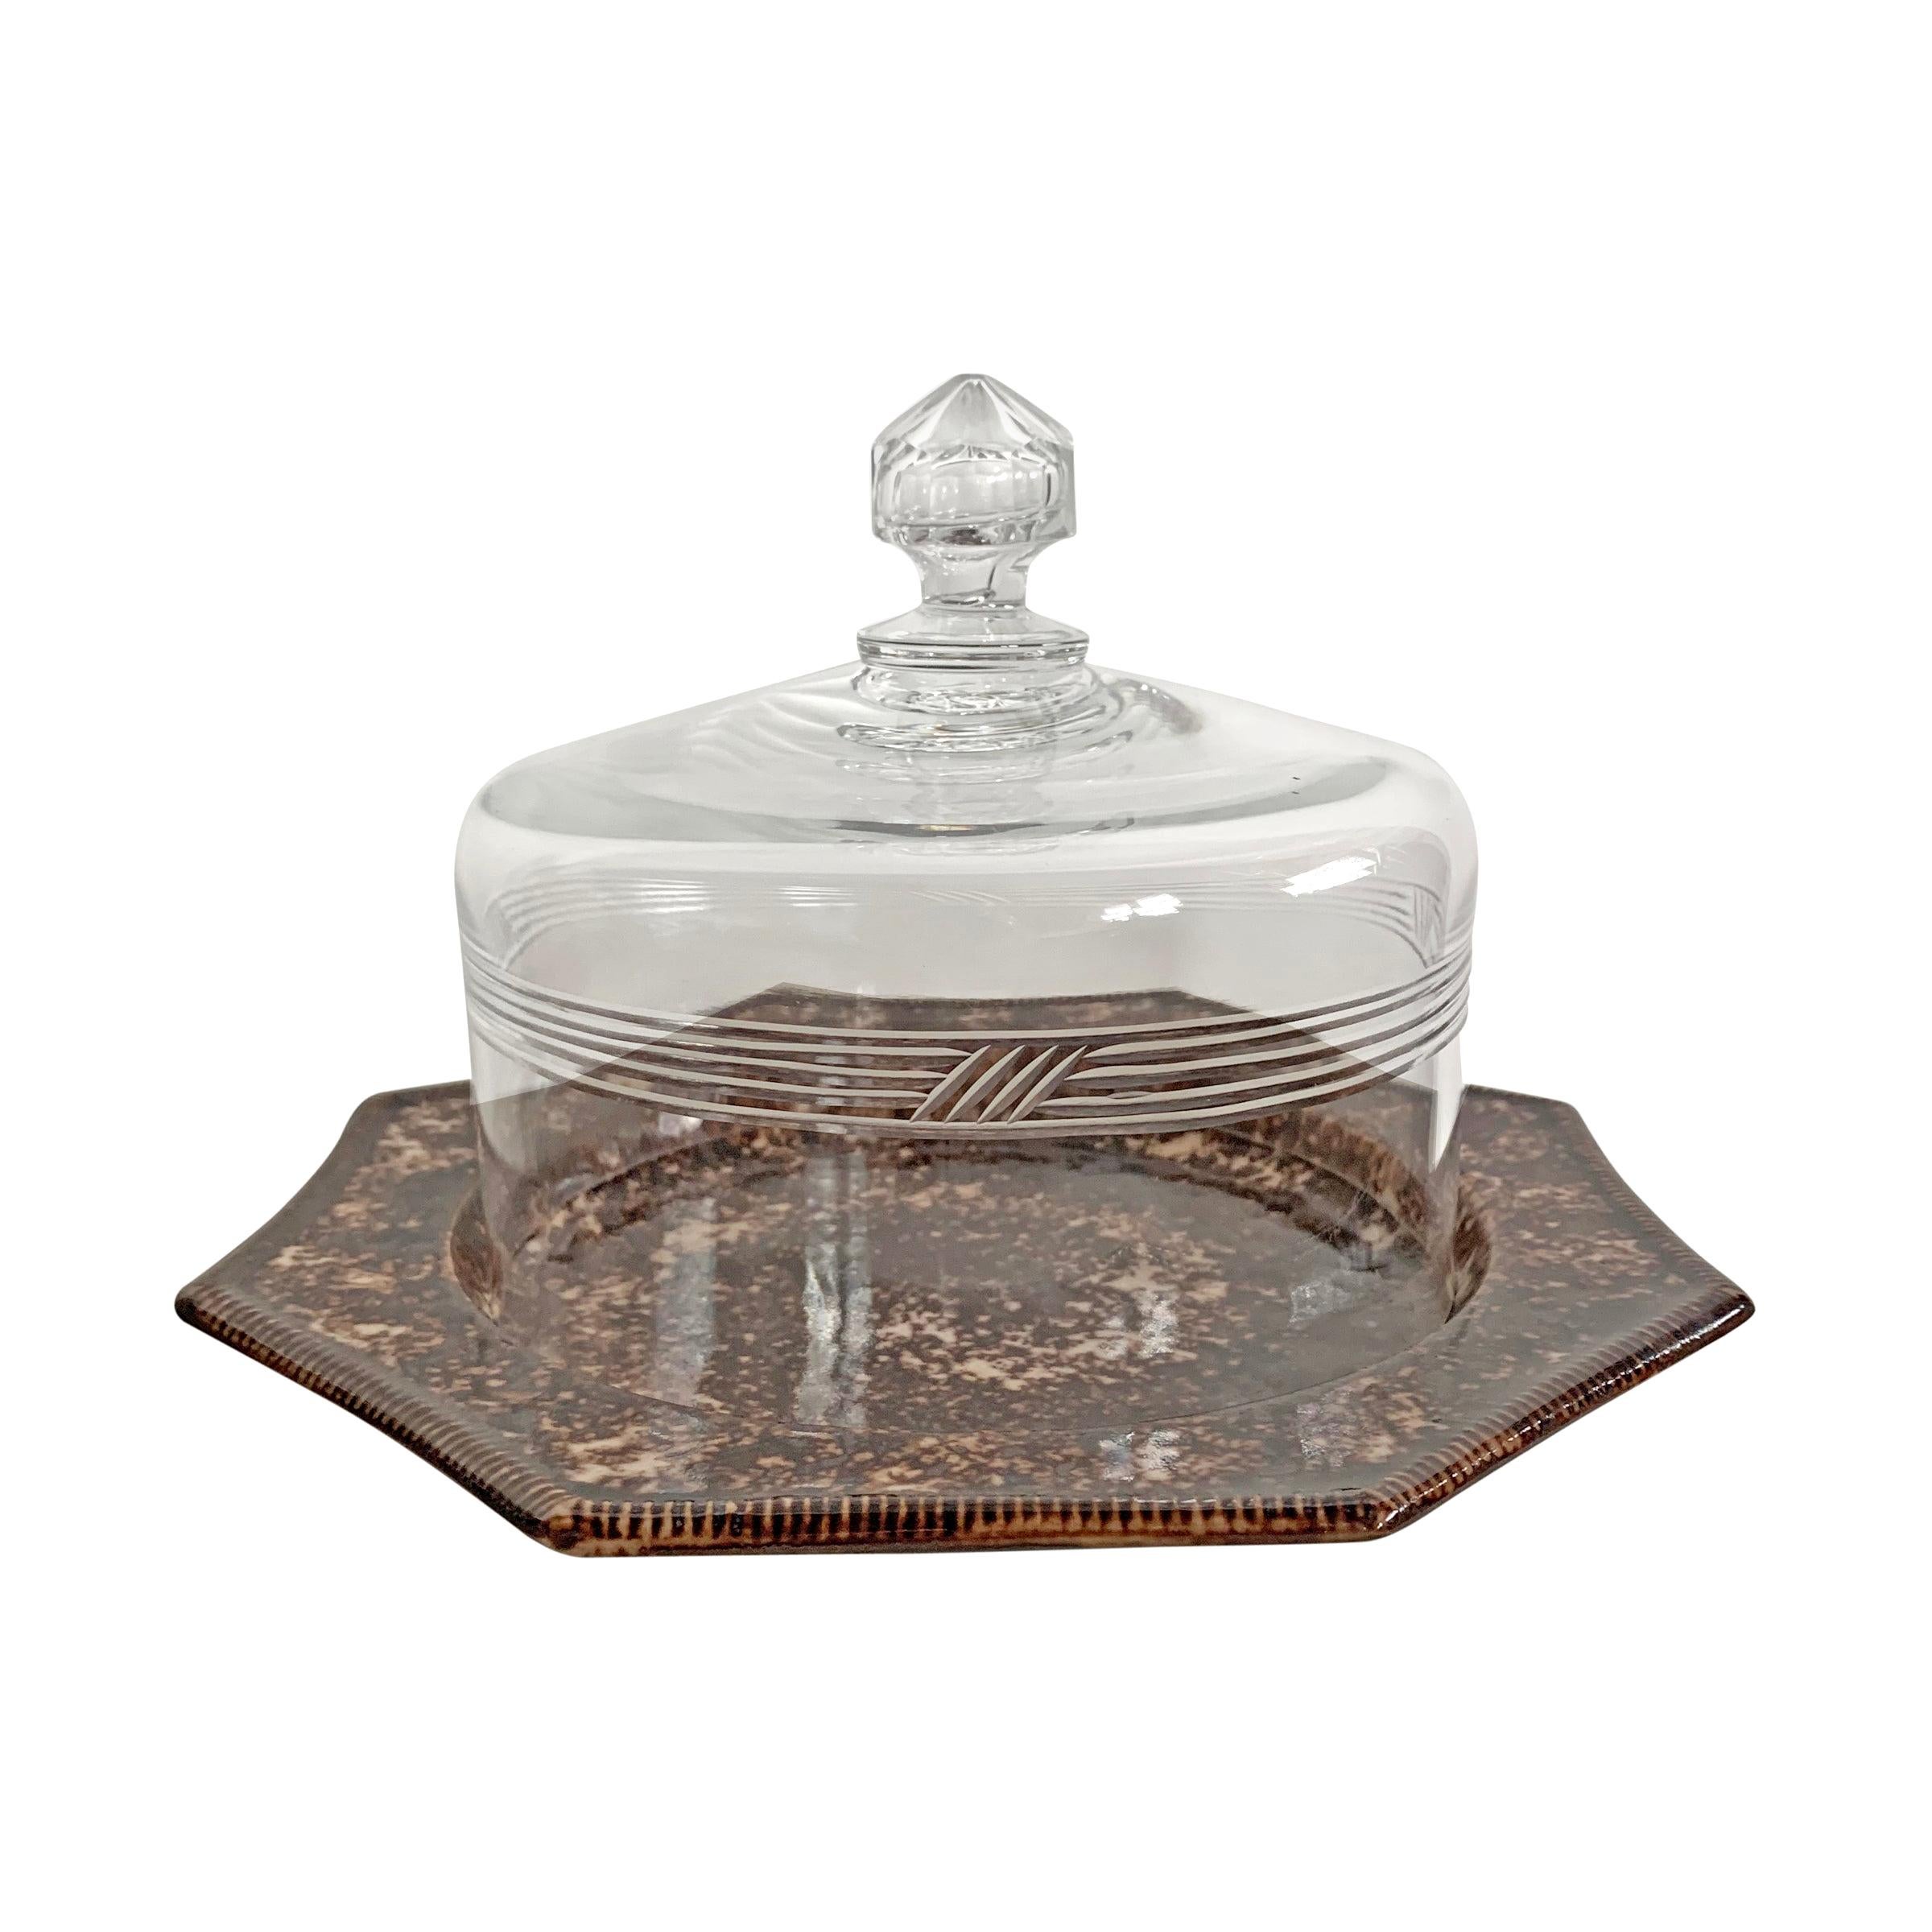 19th Century Glass Cheese Dome and Spongeware Plate